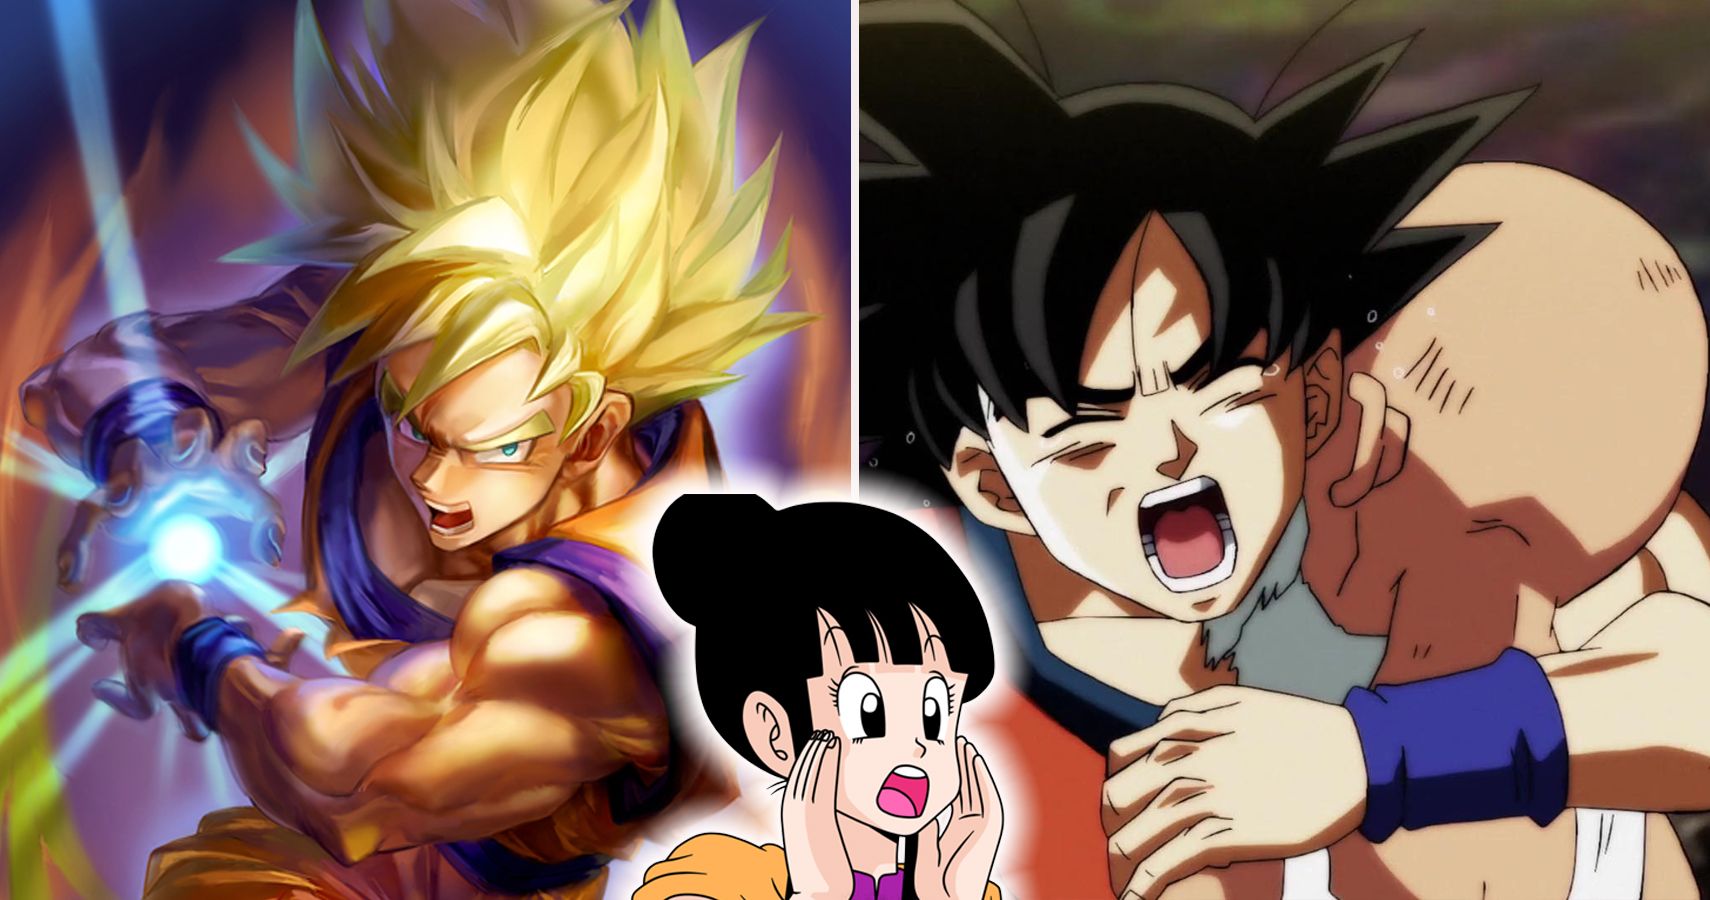 Staff appearing in Dragon Ball: Goku's Traffic Safety Anime